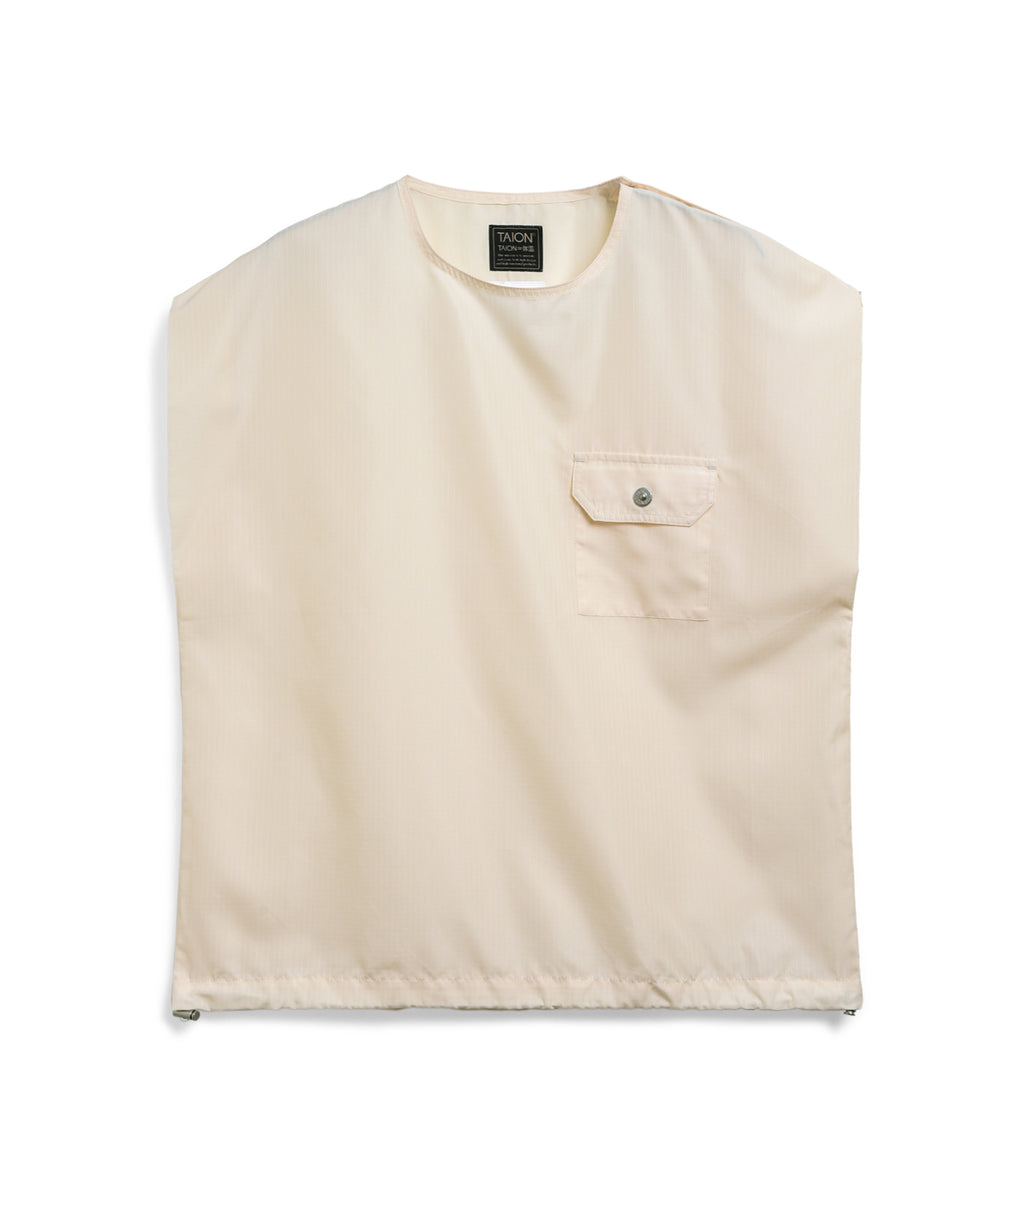 Taion Military No Sleeve Cut Sew Off White